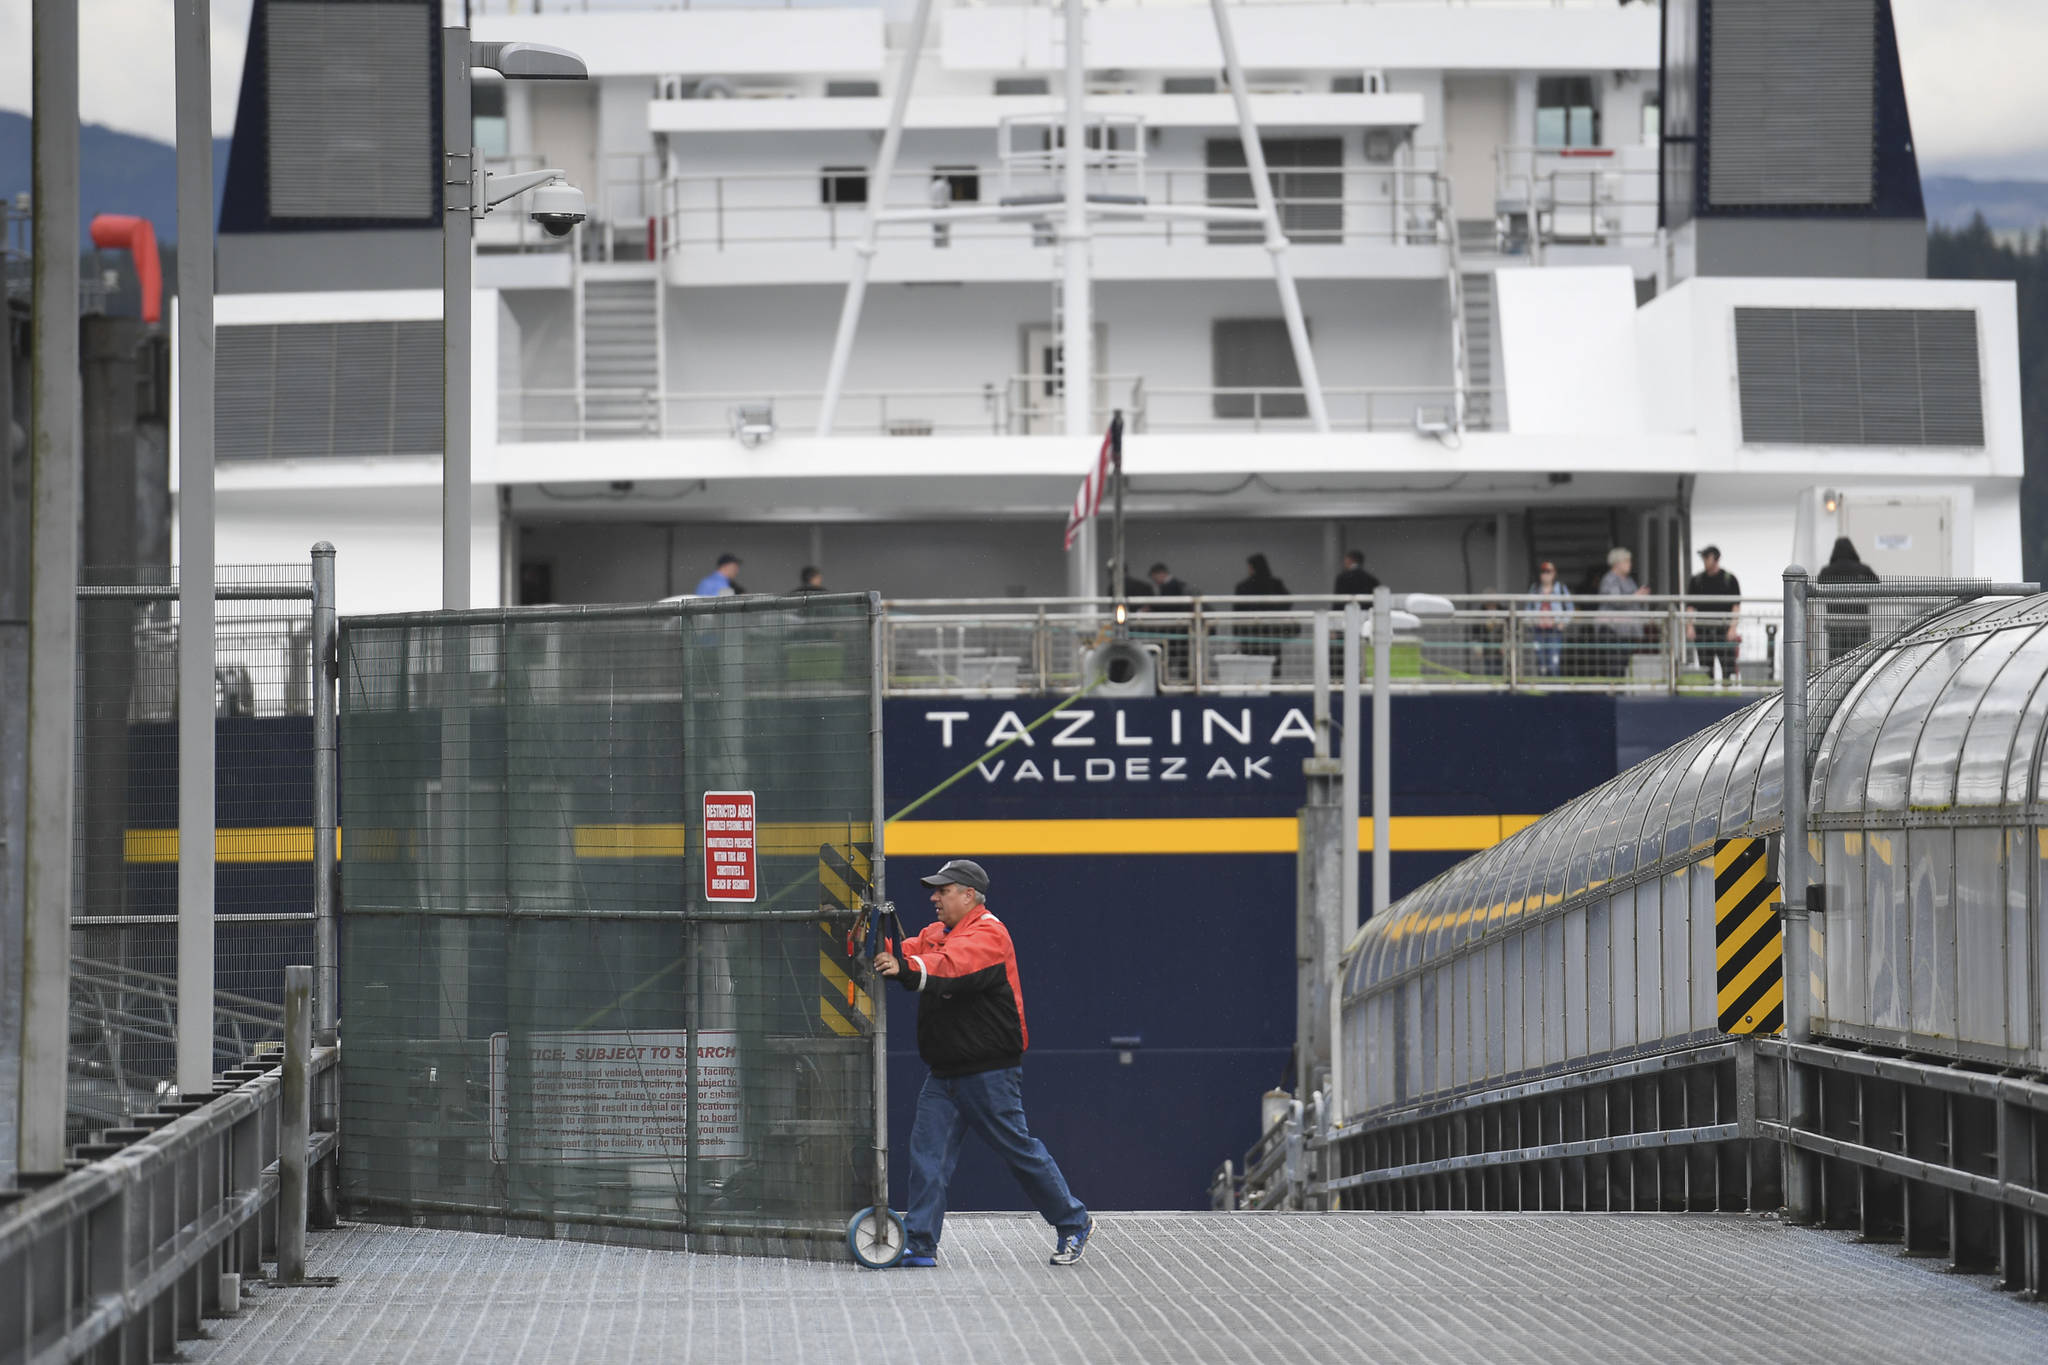 The Alaska Marine Highway System employee opens the vehicle gate after the Tazlina arrives at the Auke Bay Terminal on Wednesday, July 24, 2019. (Michael Penn | Juneau Empire)